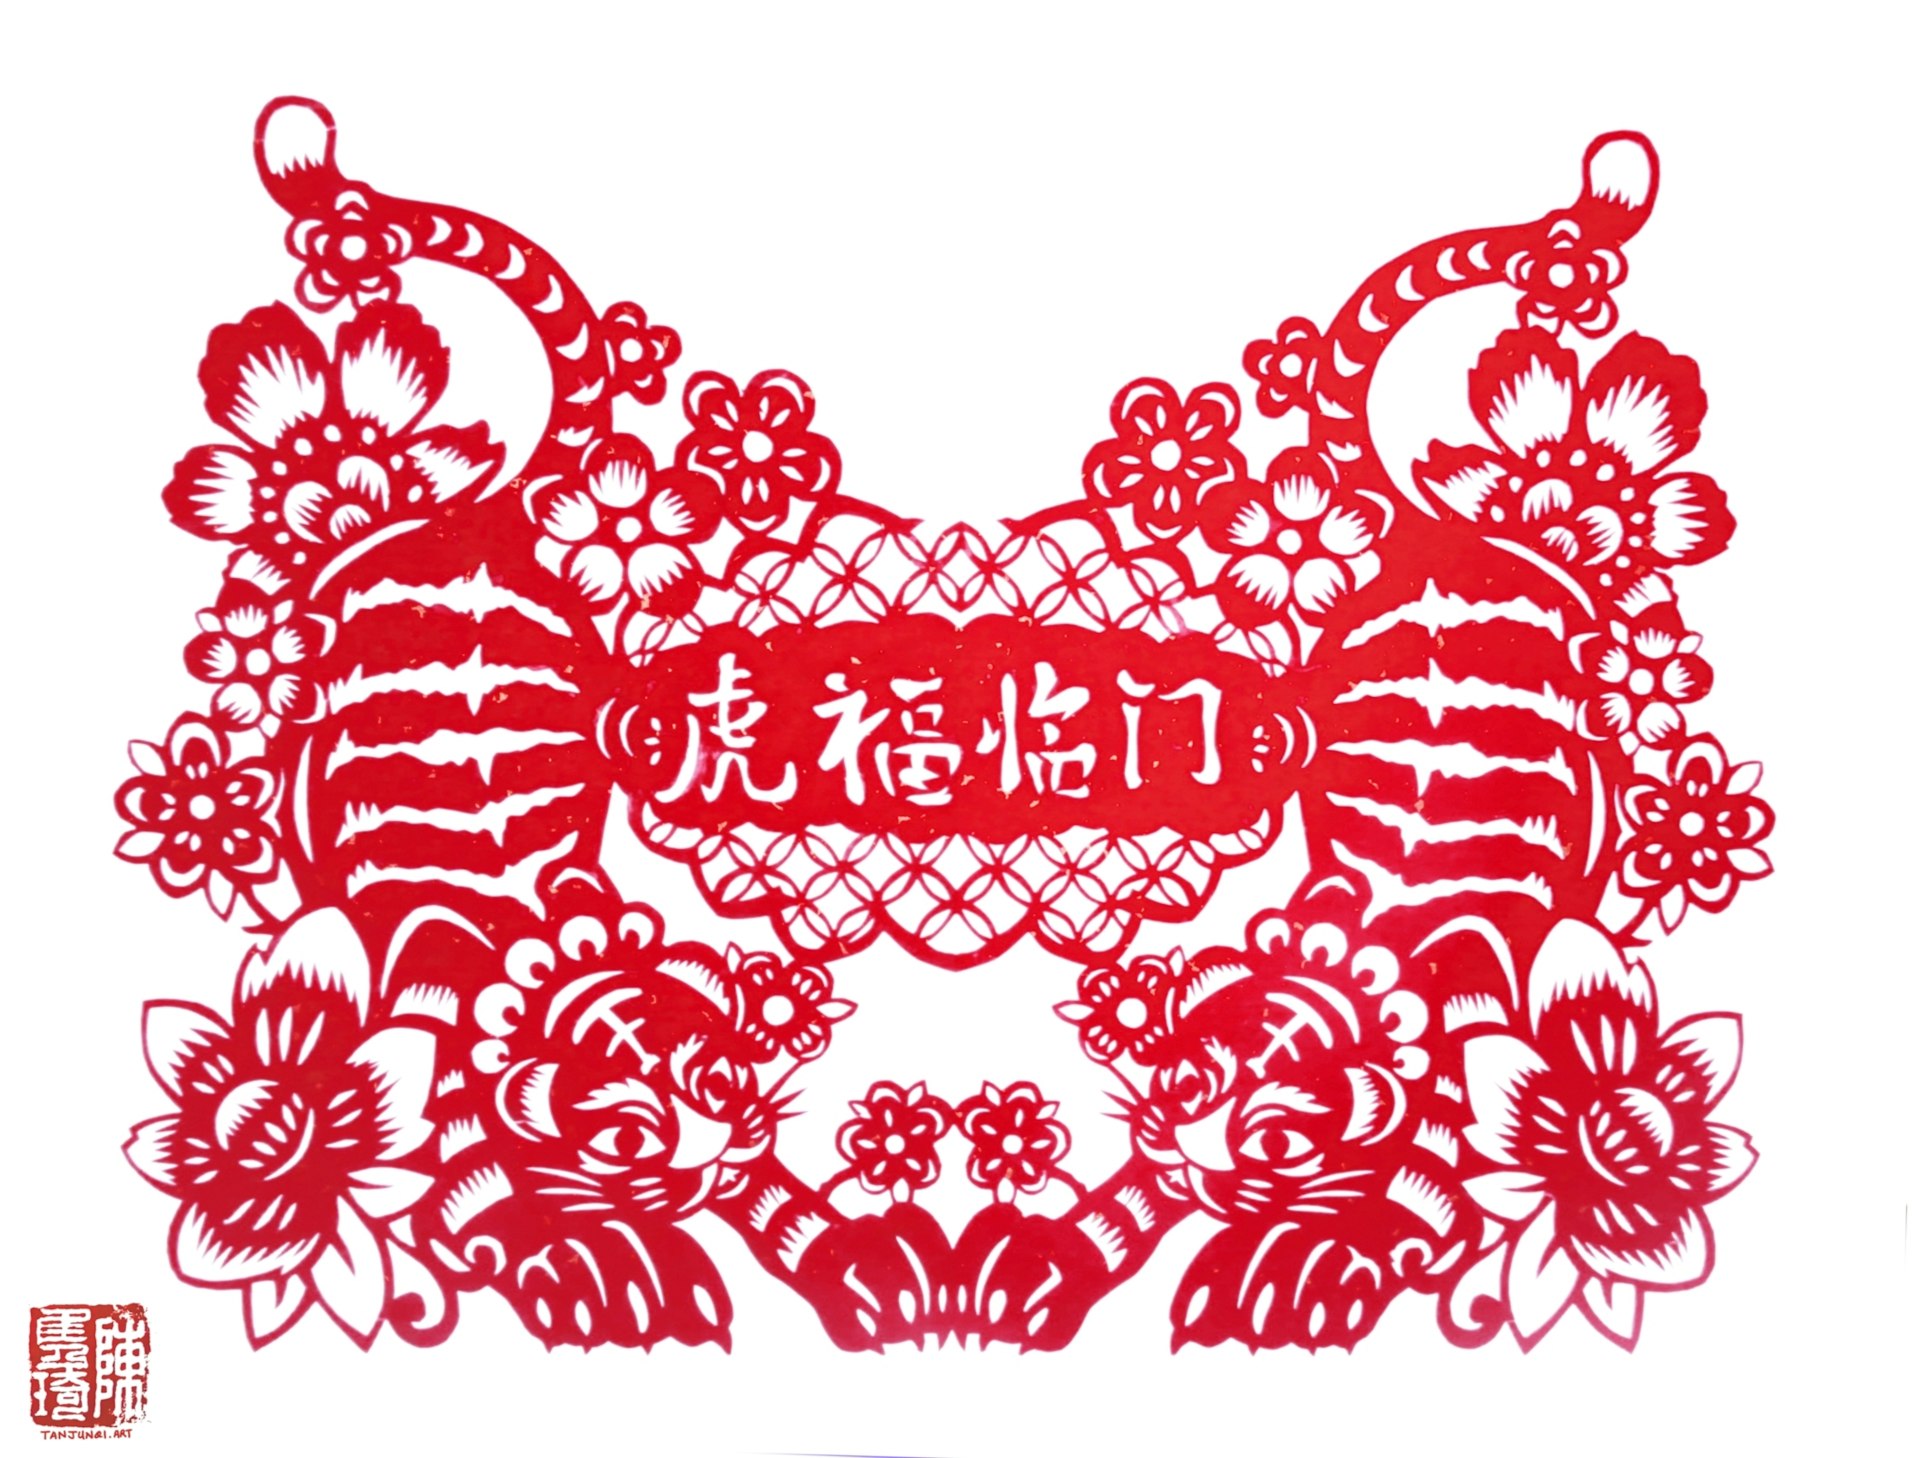 A symmetrical Chinese papercut showing two tigers crouching, and a pun on an auspicious Chinese phrase: May the Five Prosperities Arrive at your Door